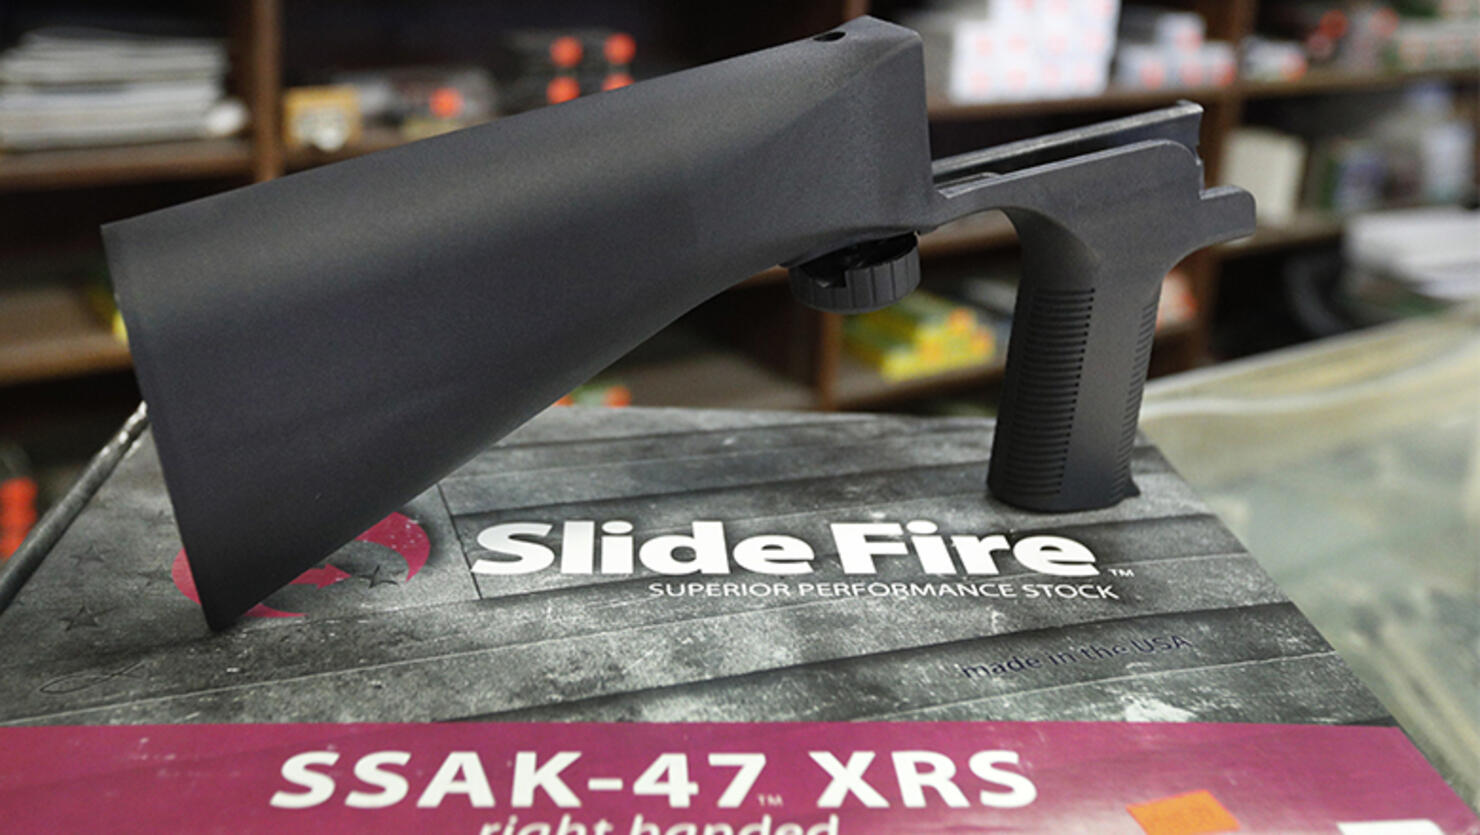 A bump stock device, made by Slide Fire, that fits on a semi-automatic rifle to increase the firing speed, making it similar to a fully automatic rifle, sits on it's packaging at a gun store 